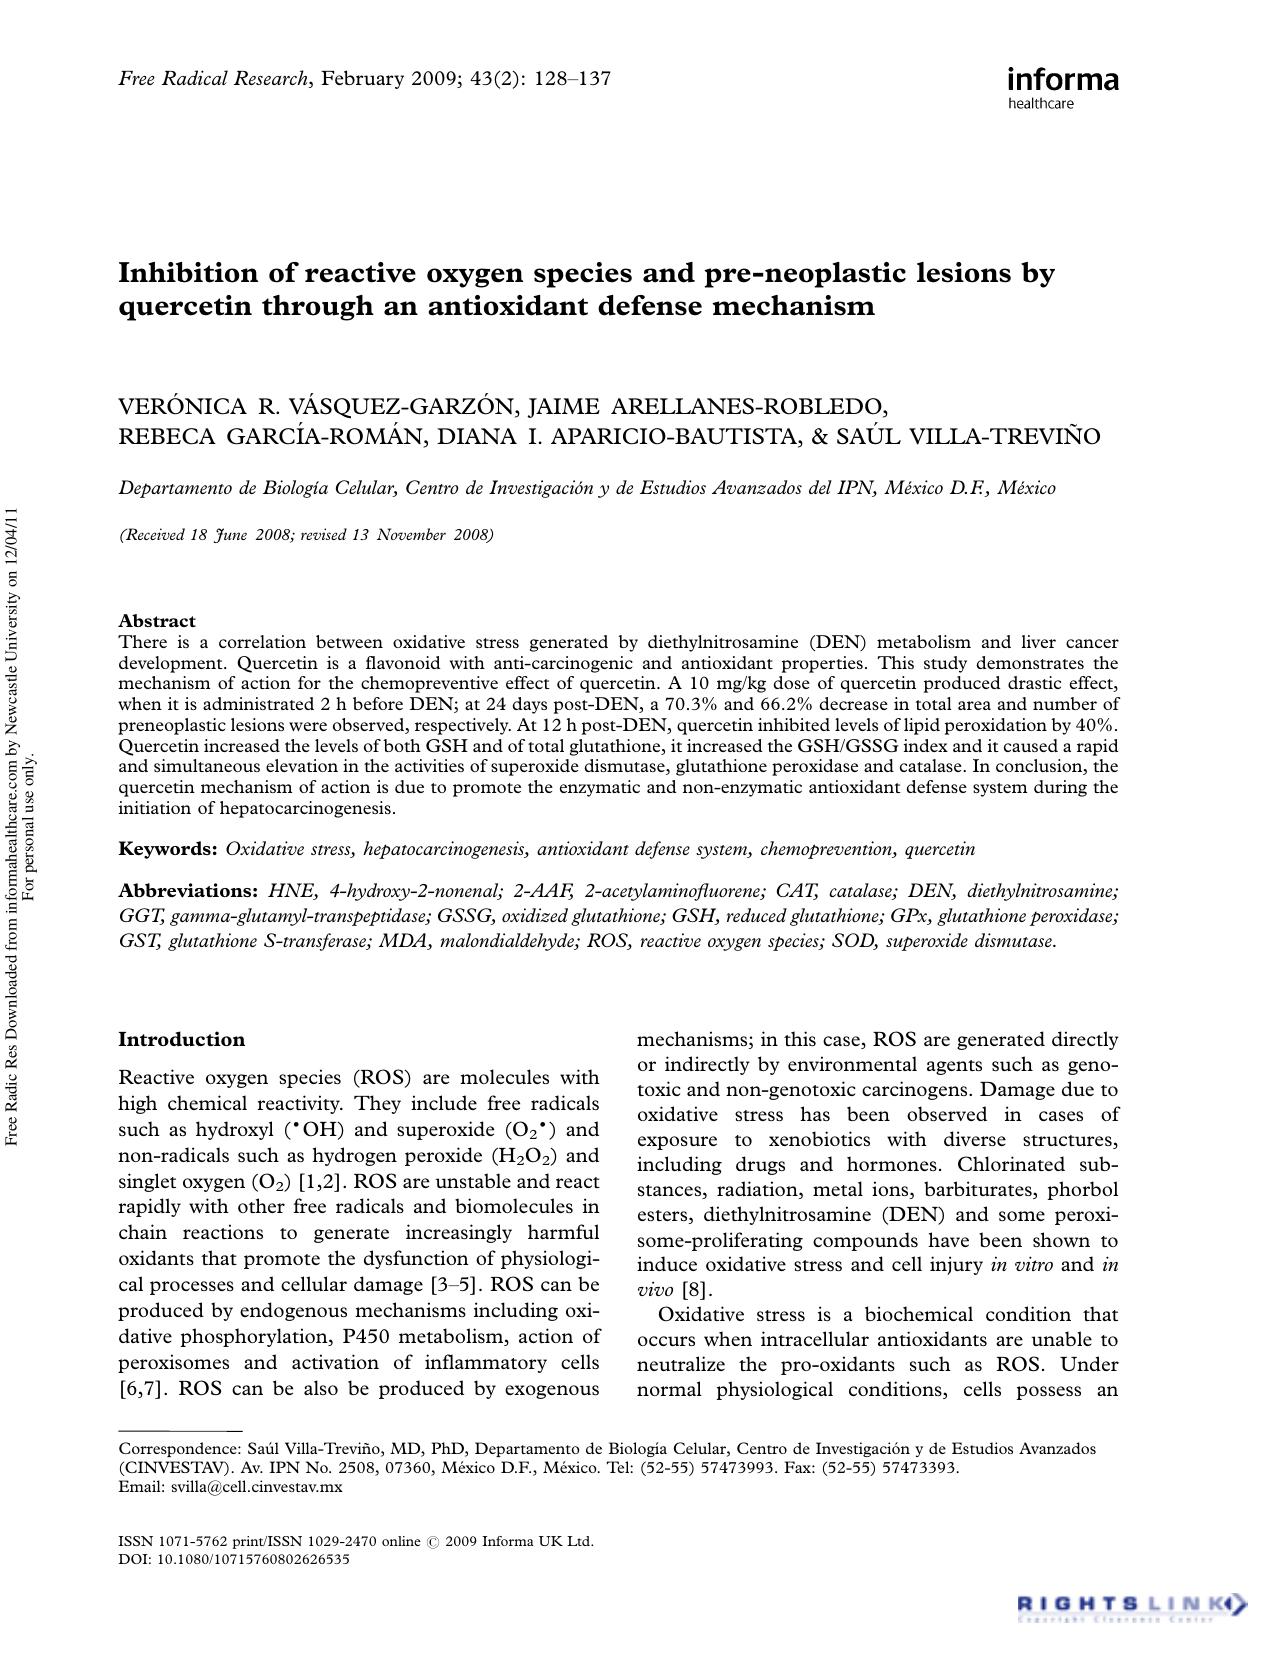 Inhibition of reactive oxygen species and pre-neoplastic lesions by quercetin through an antioxidant defense mechanism by unknow